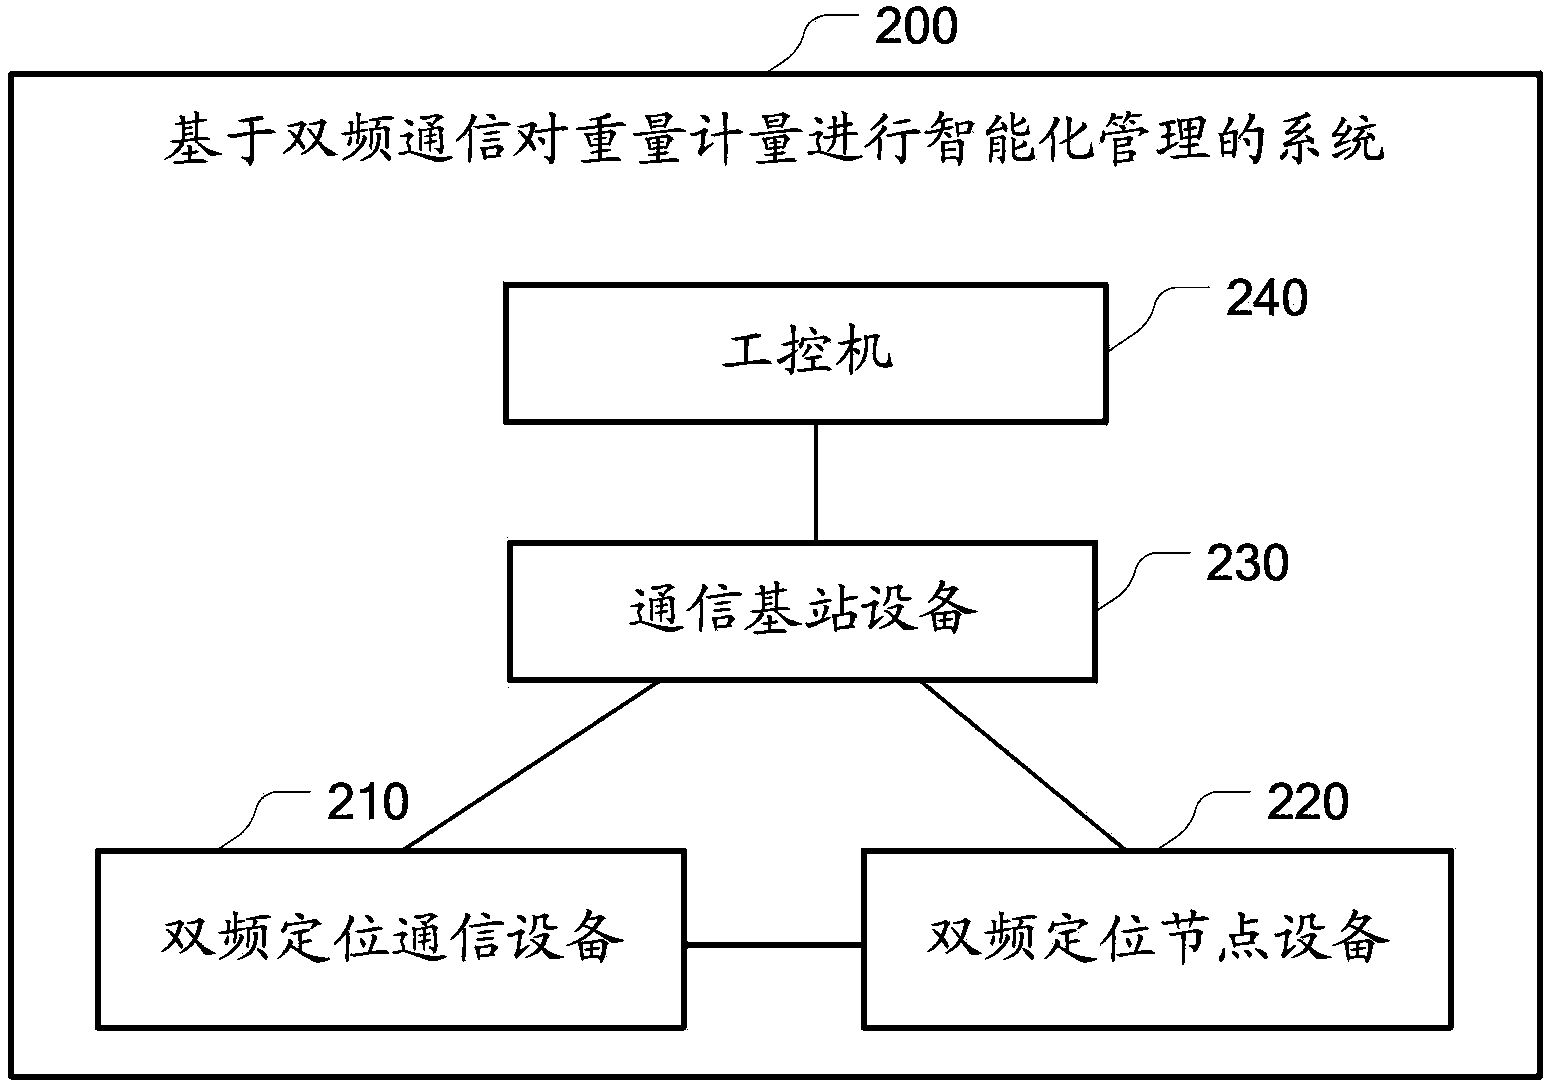 Dual-frequency communication based intelligent management method and system of weight measurement